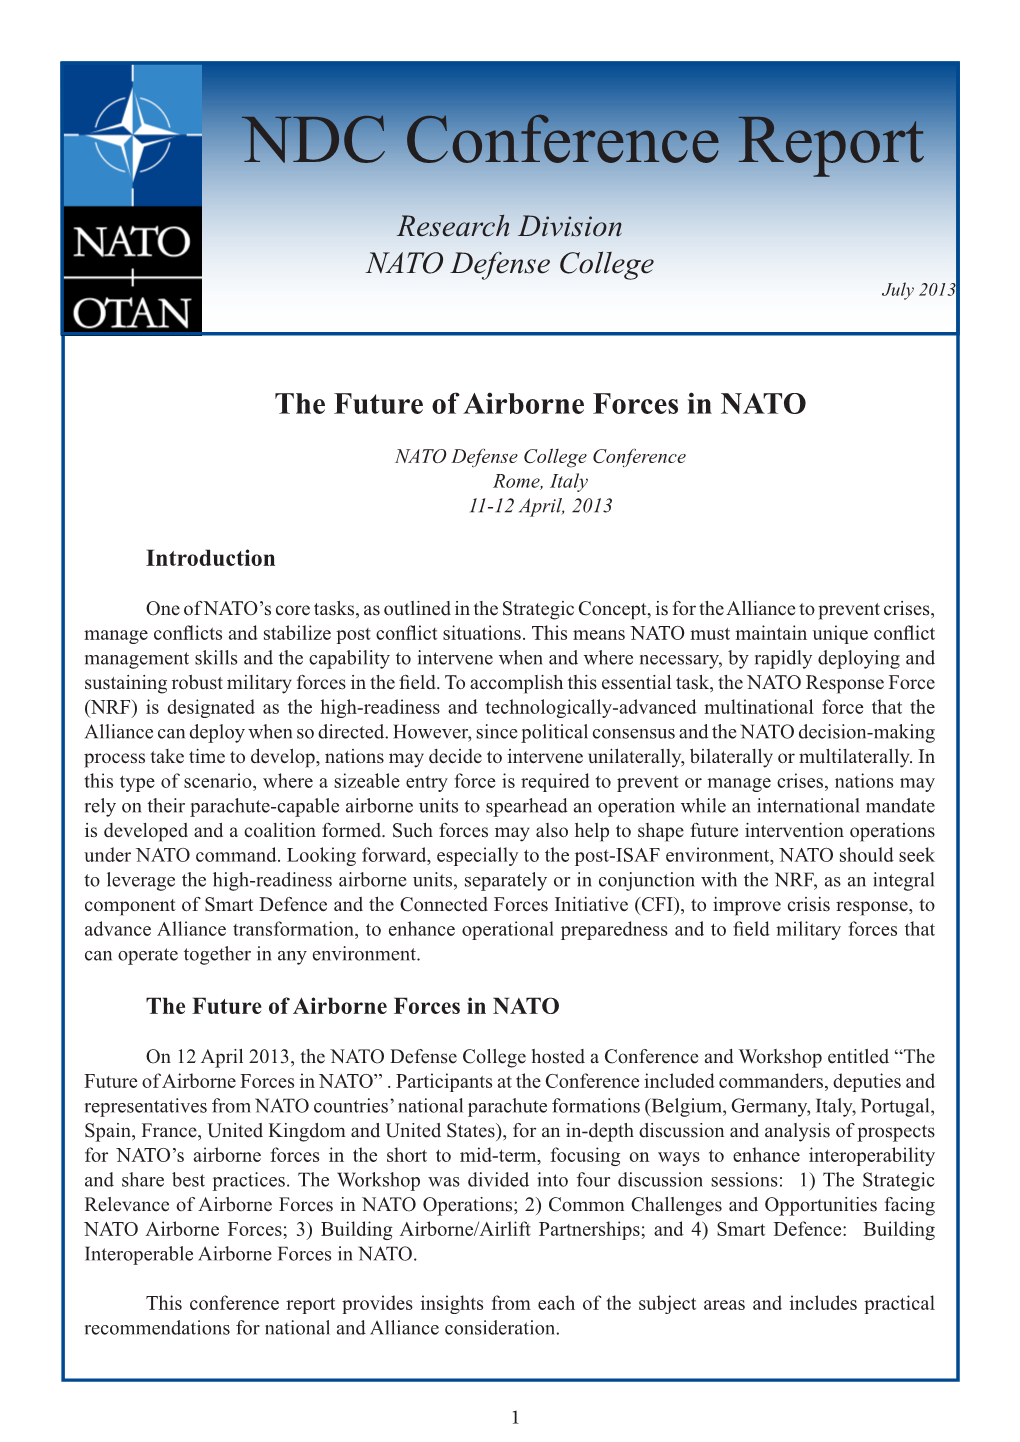 The Future of Airborne Forces in NATO